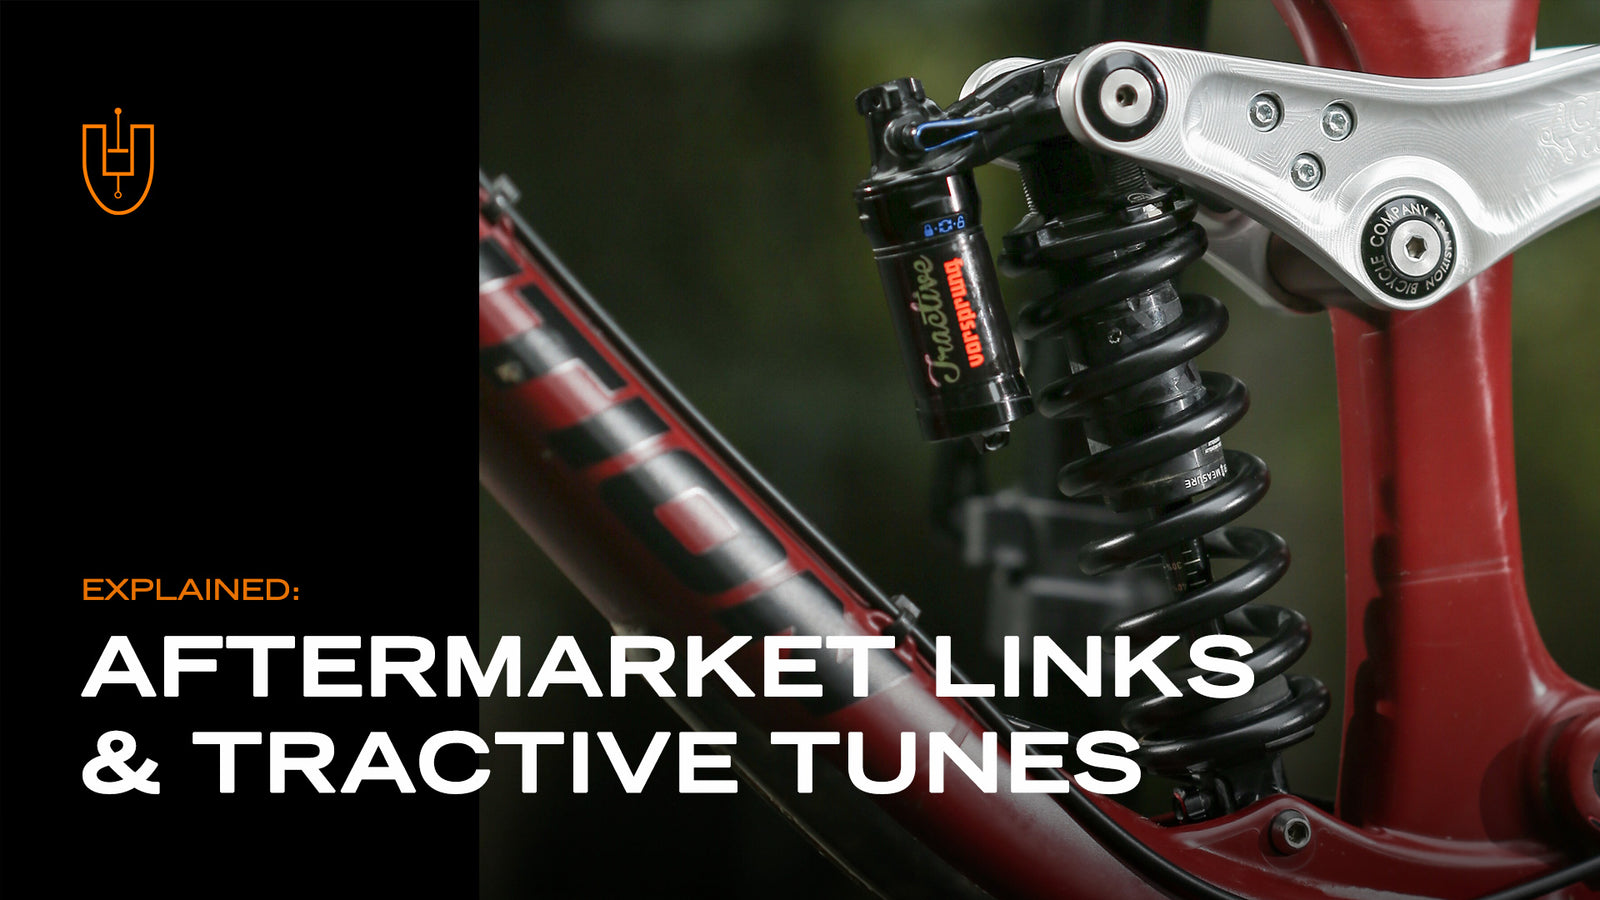 Explained: Aftermarket Links & Tractive Tunes